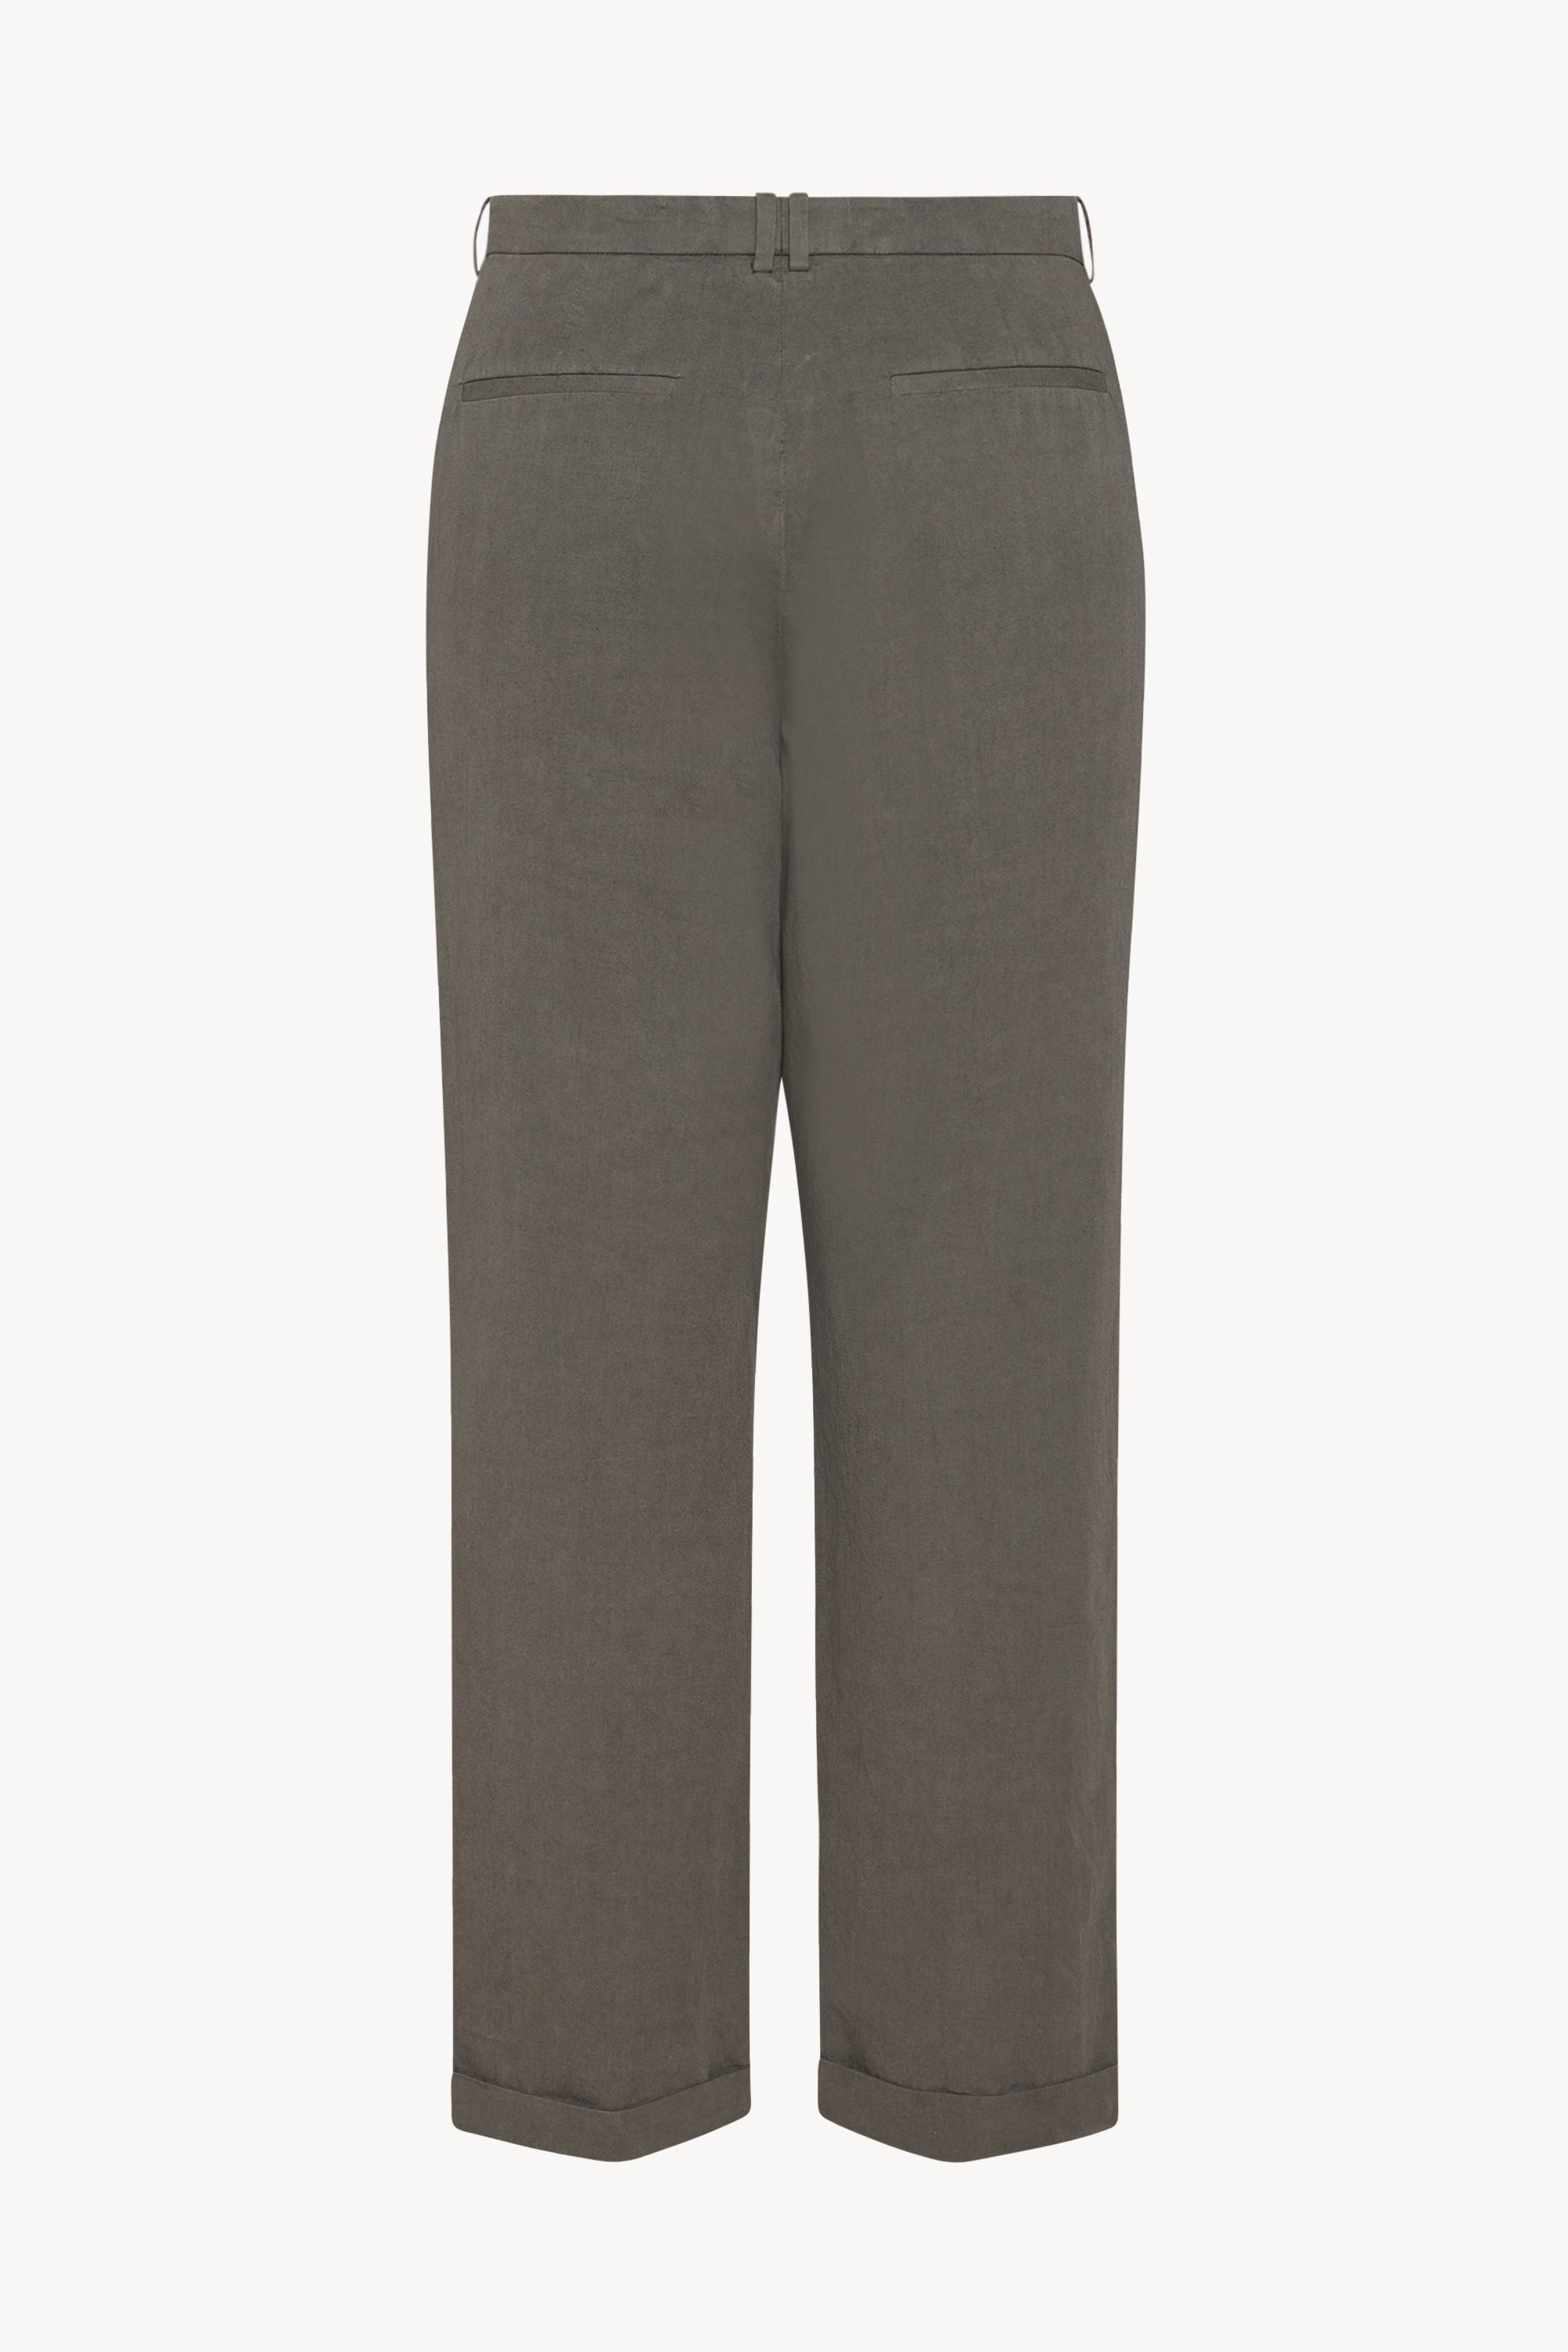 Keenan Pant in Cotton and Linen - 2